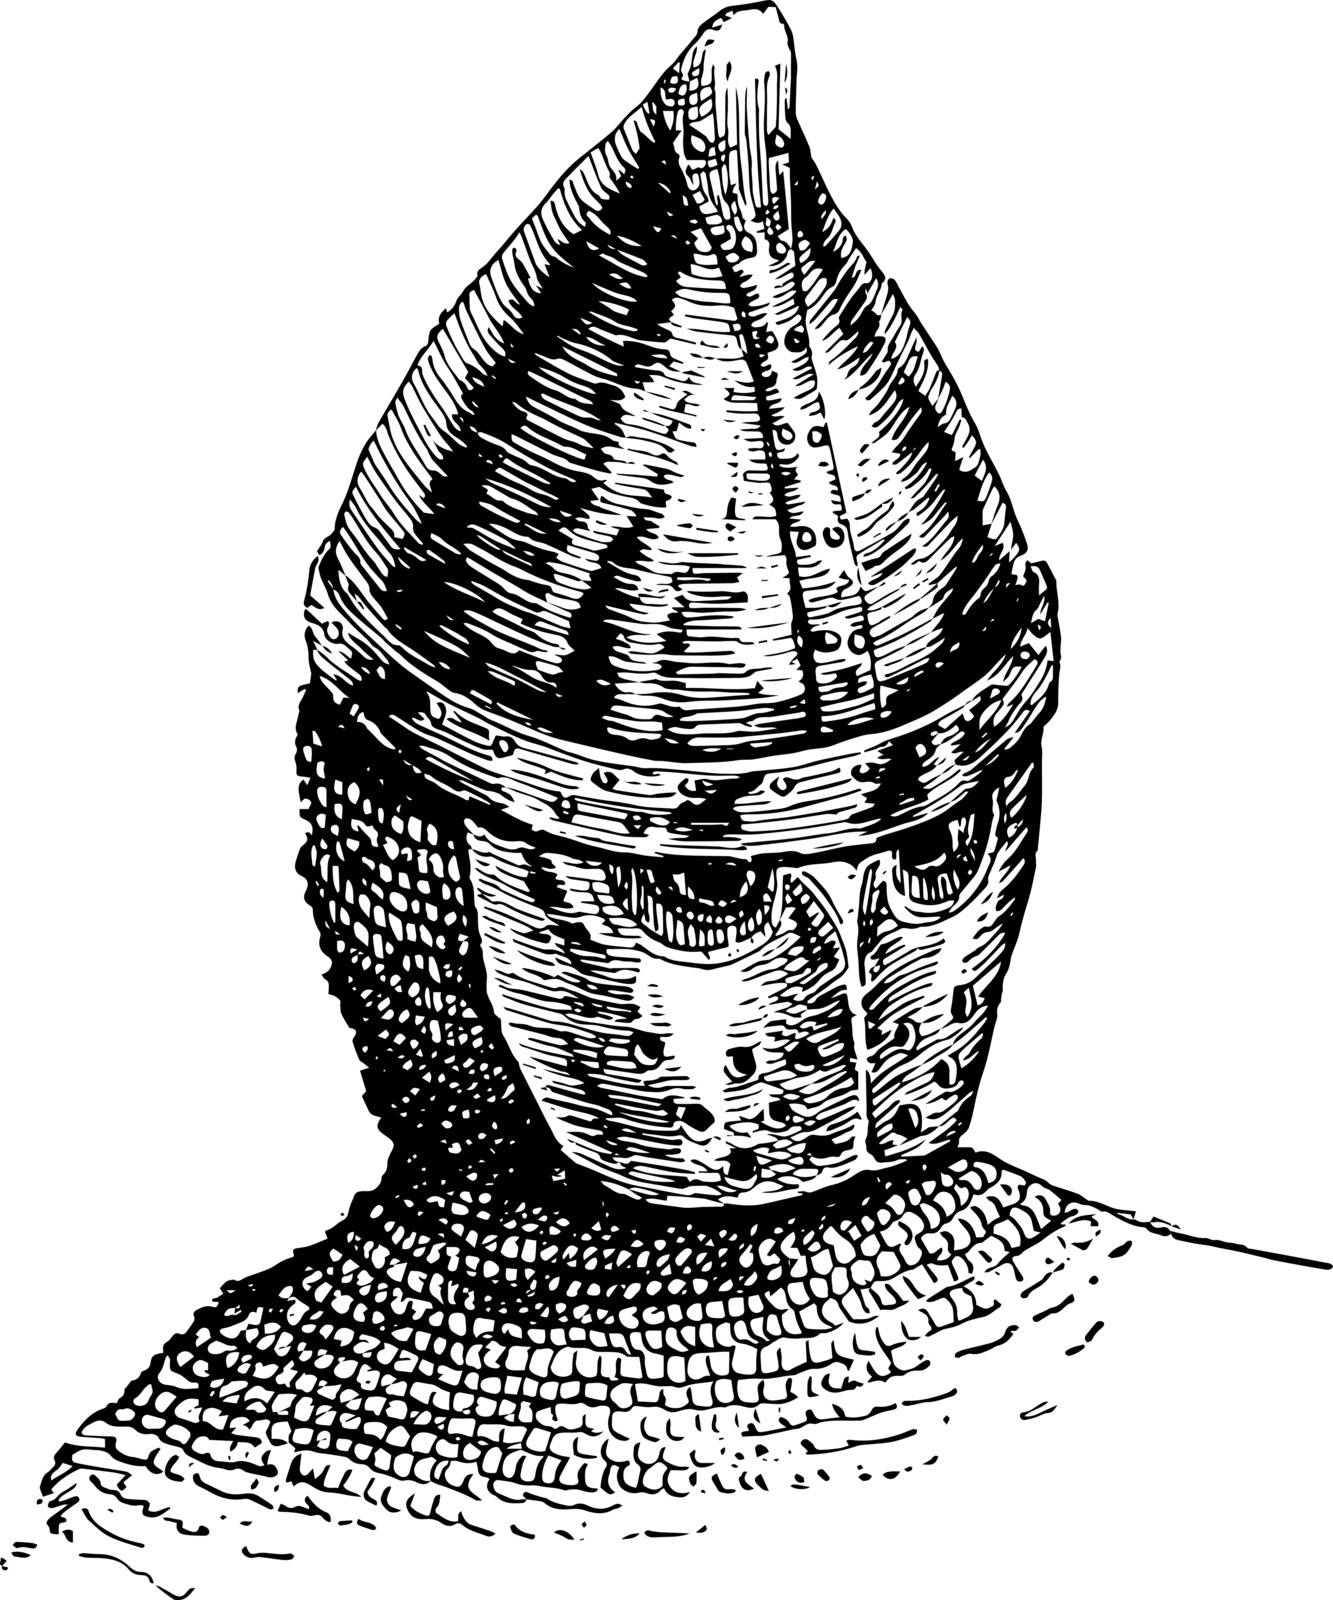 Mask of Steel was an illustration of a 13th century vintage line drawing or engraving illustration.